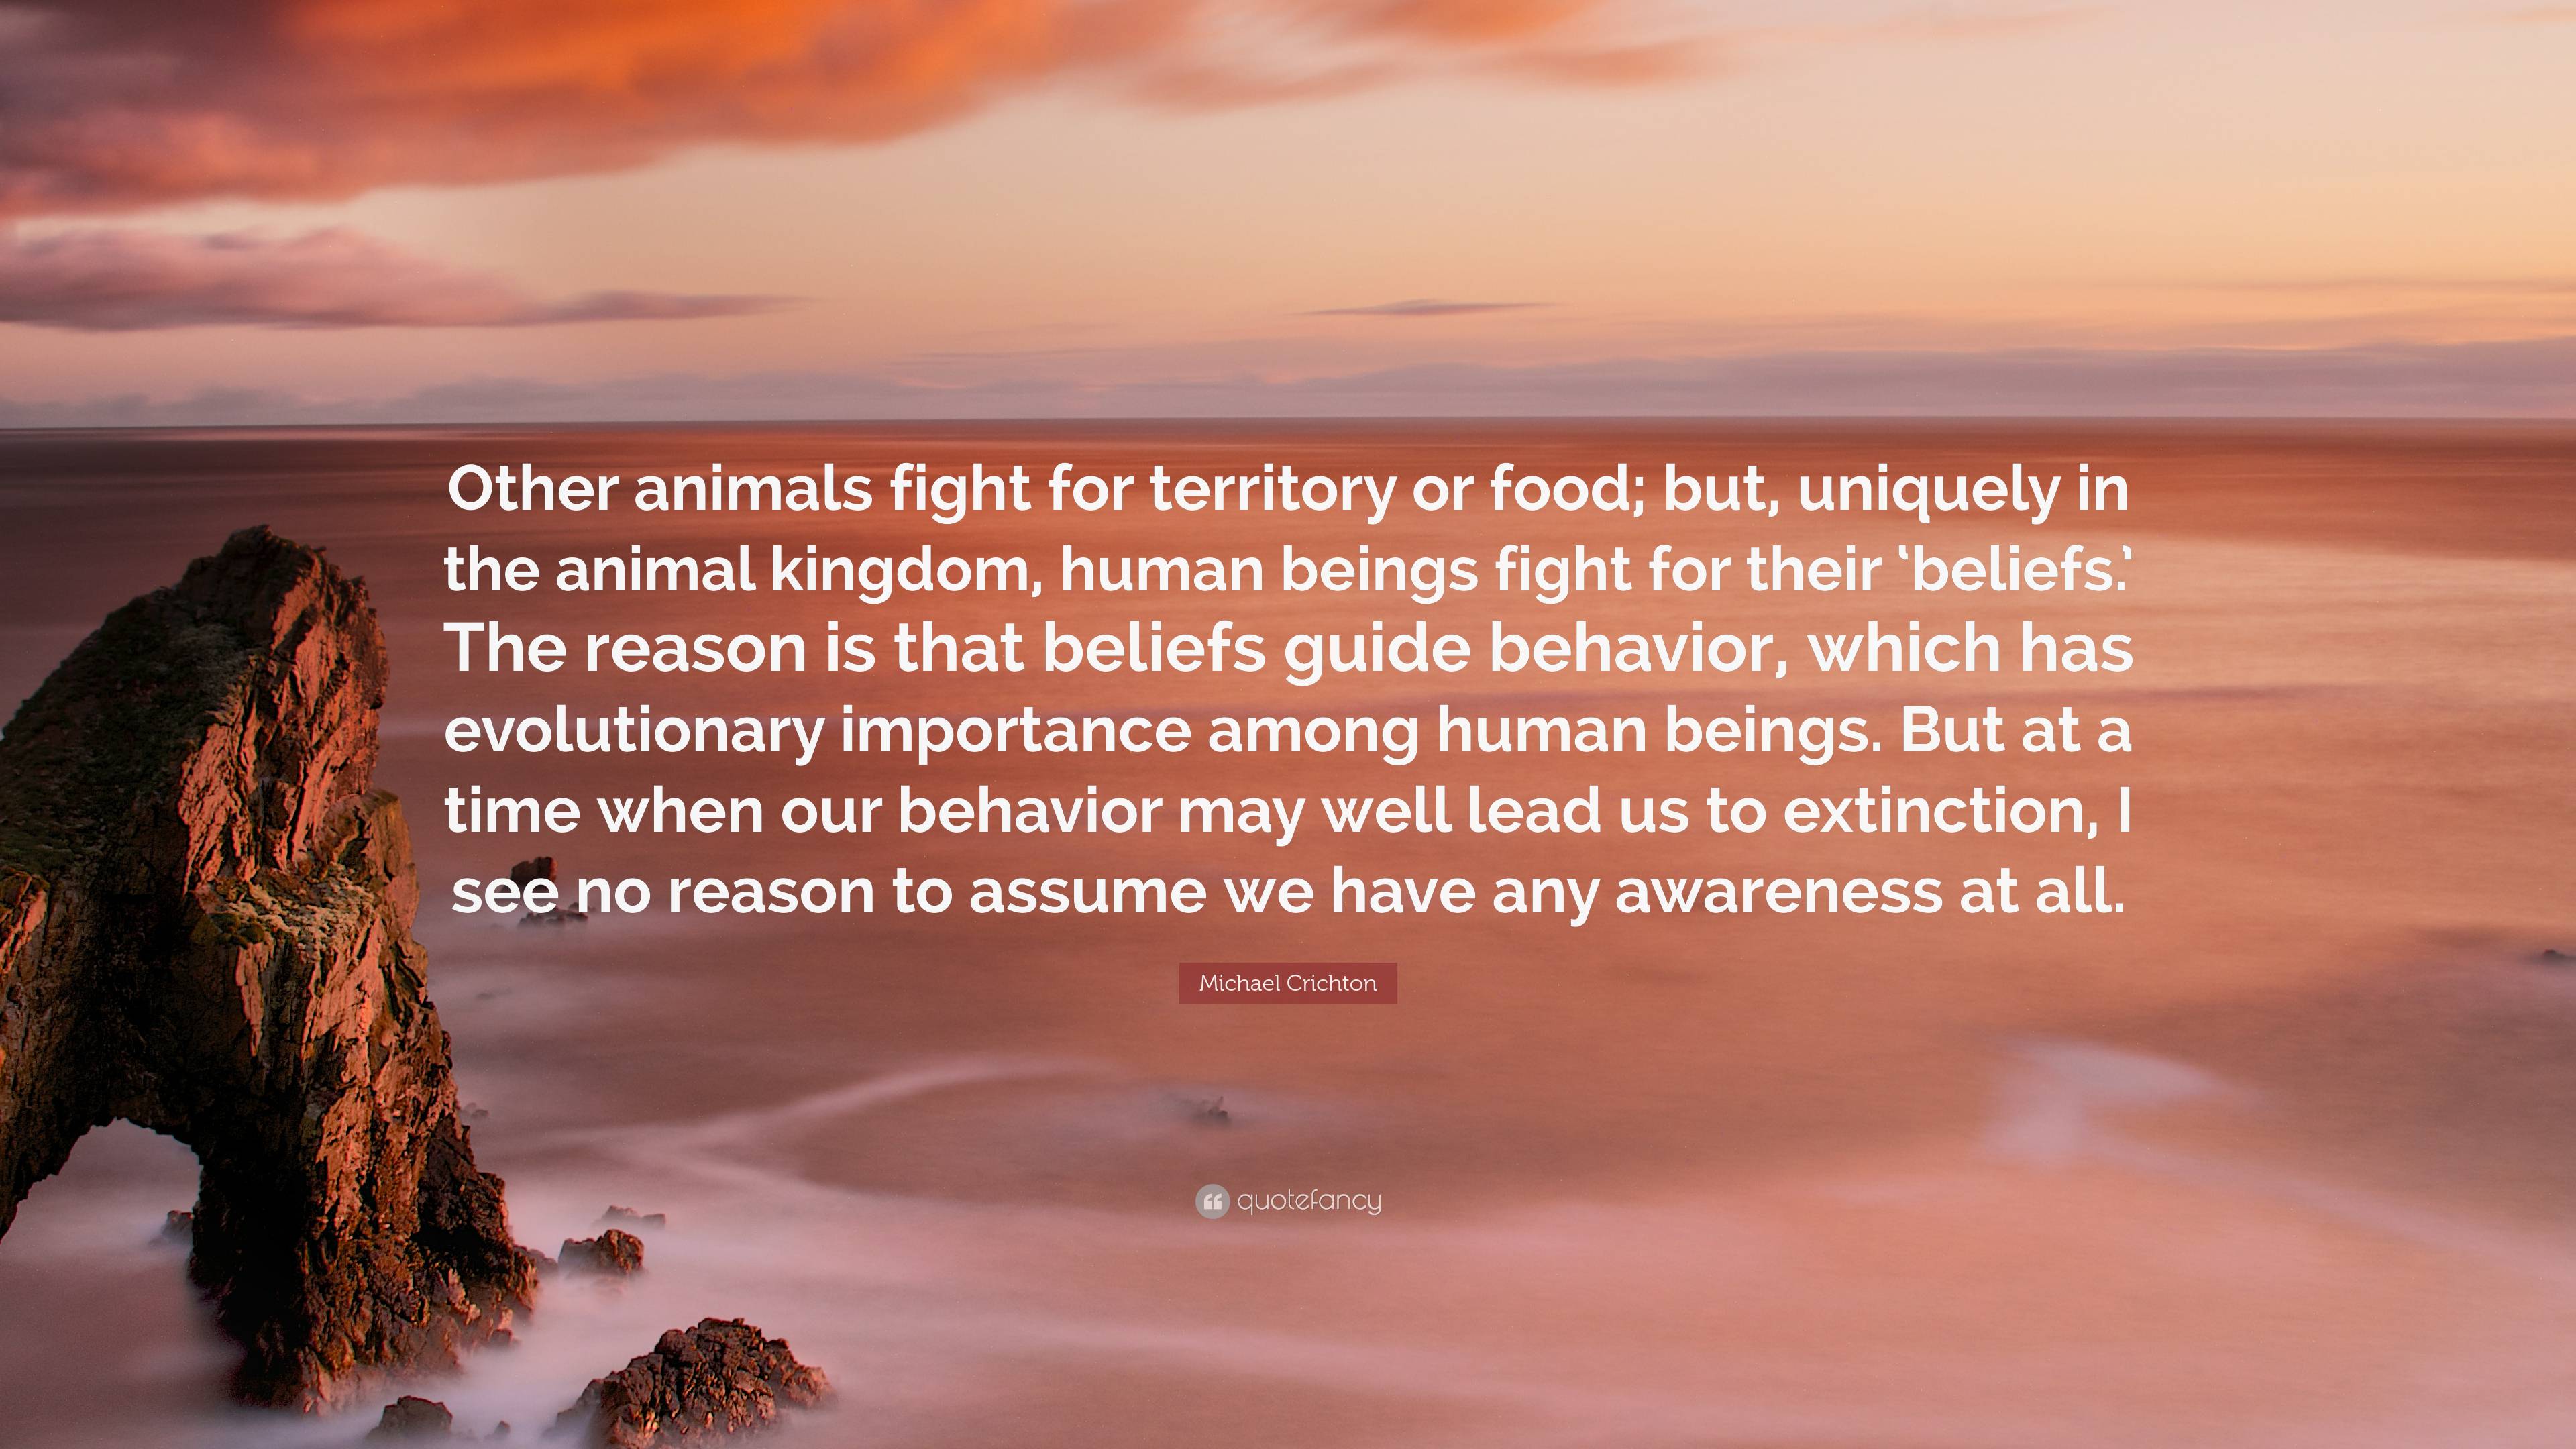 Michael Crichton Quote: “Other animals fight for territory or food; but,  uniquely in the animal kingdom, human beings fight for their 'beliefs.' ...”